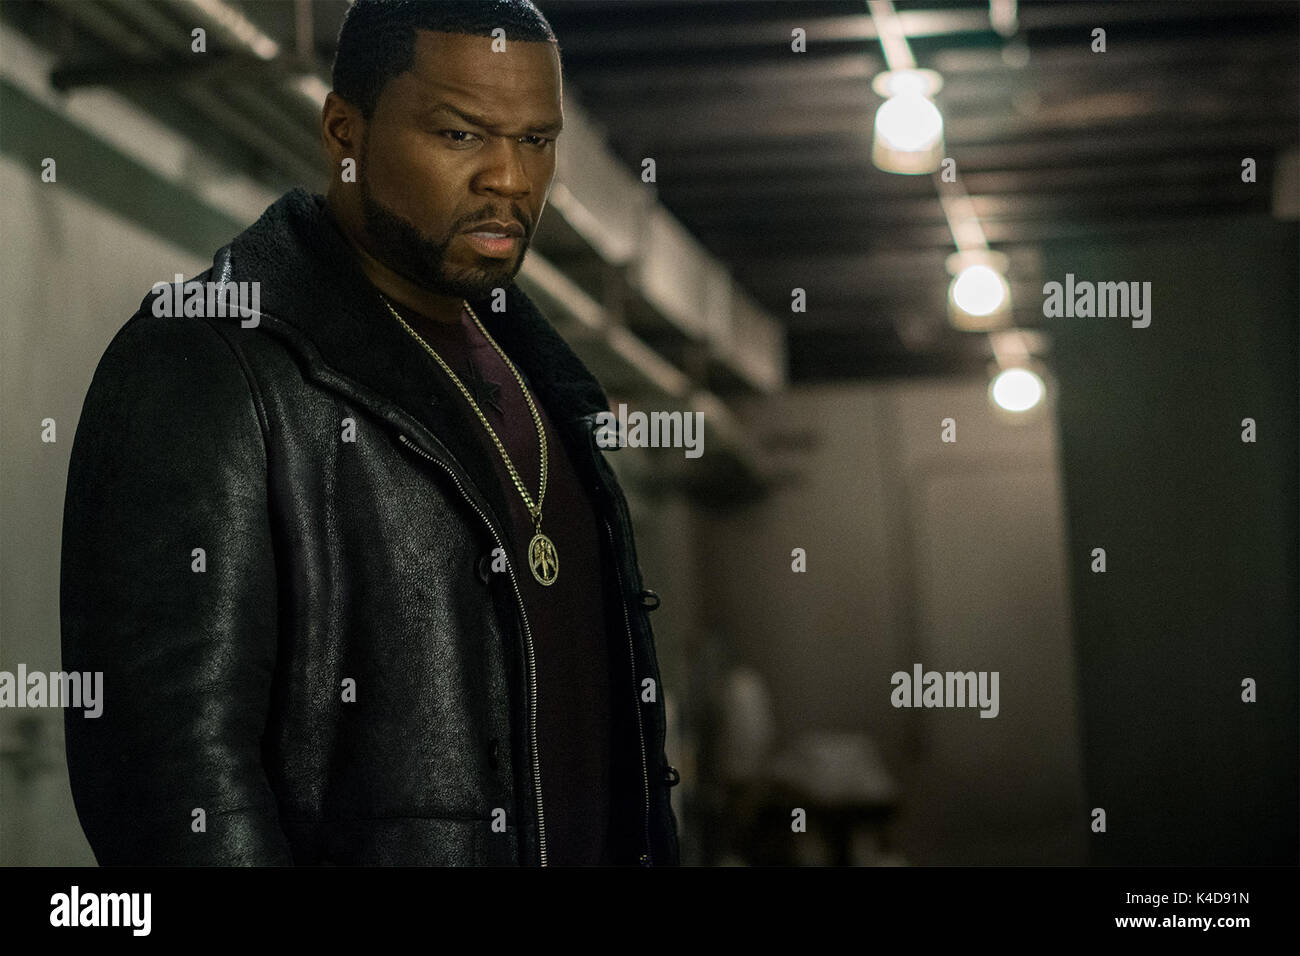 POWER, Curtis '50 Cent' Jackson in 'Things Are Going To Get Worse' (Season 4, Episode 2, aired July 2, 2017). ph: Myles Aronowitz/©Starz!/courtesy Everett Collection Stock Photo